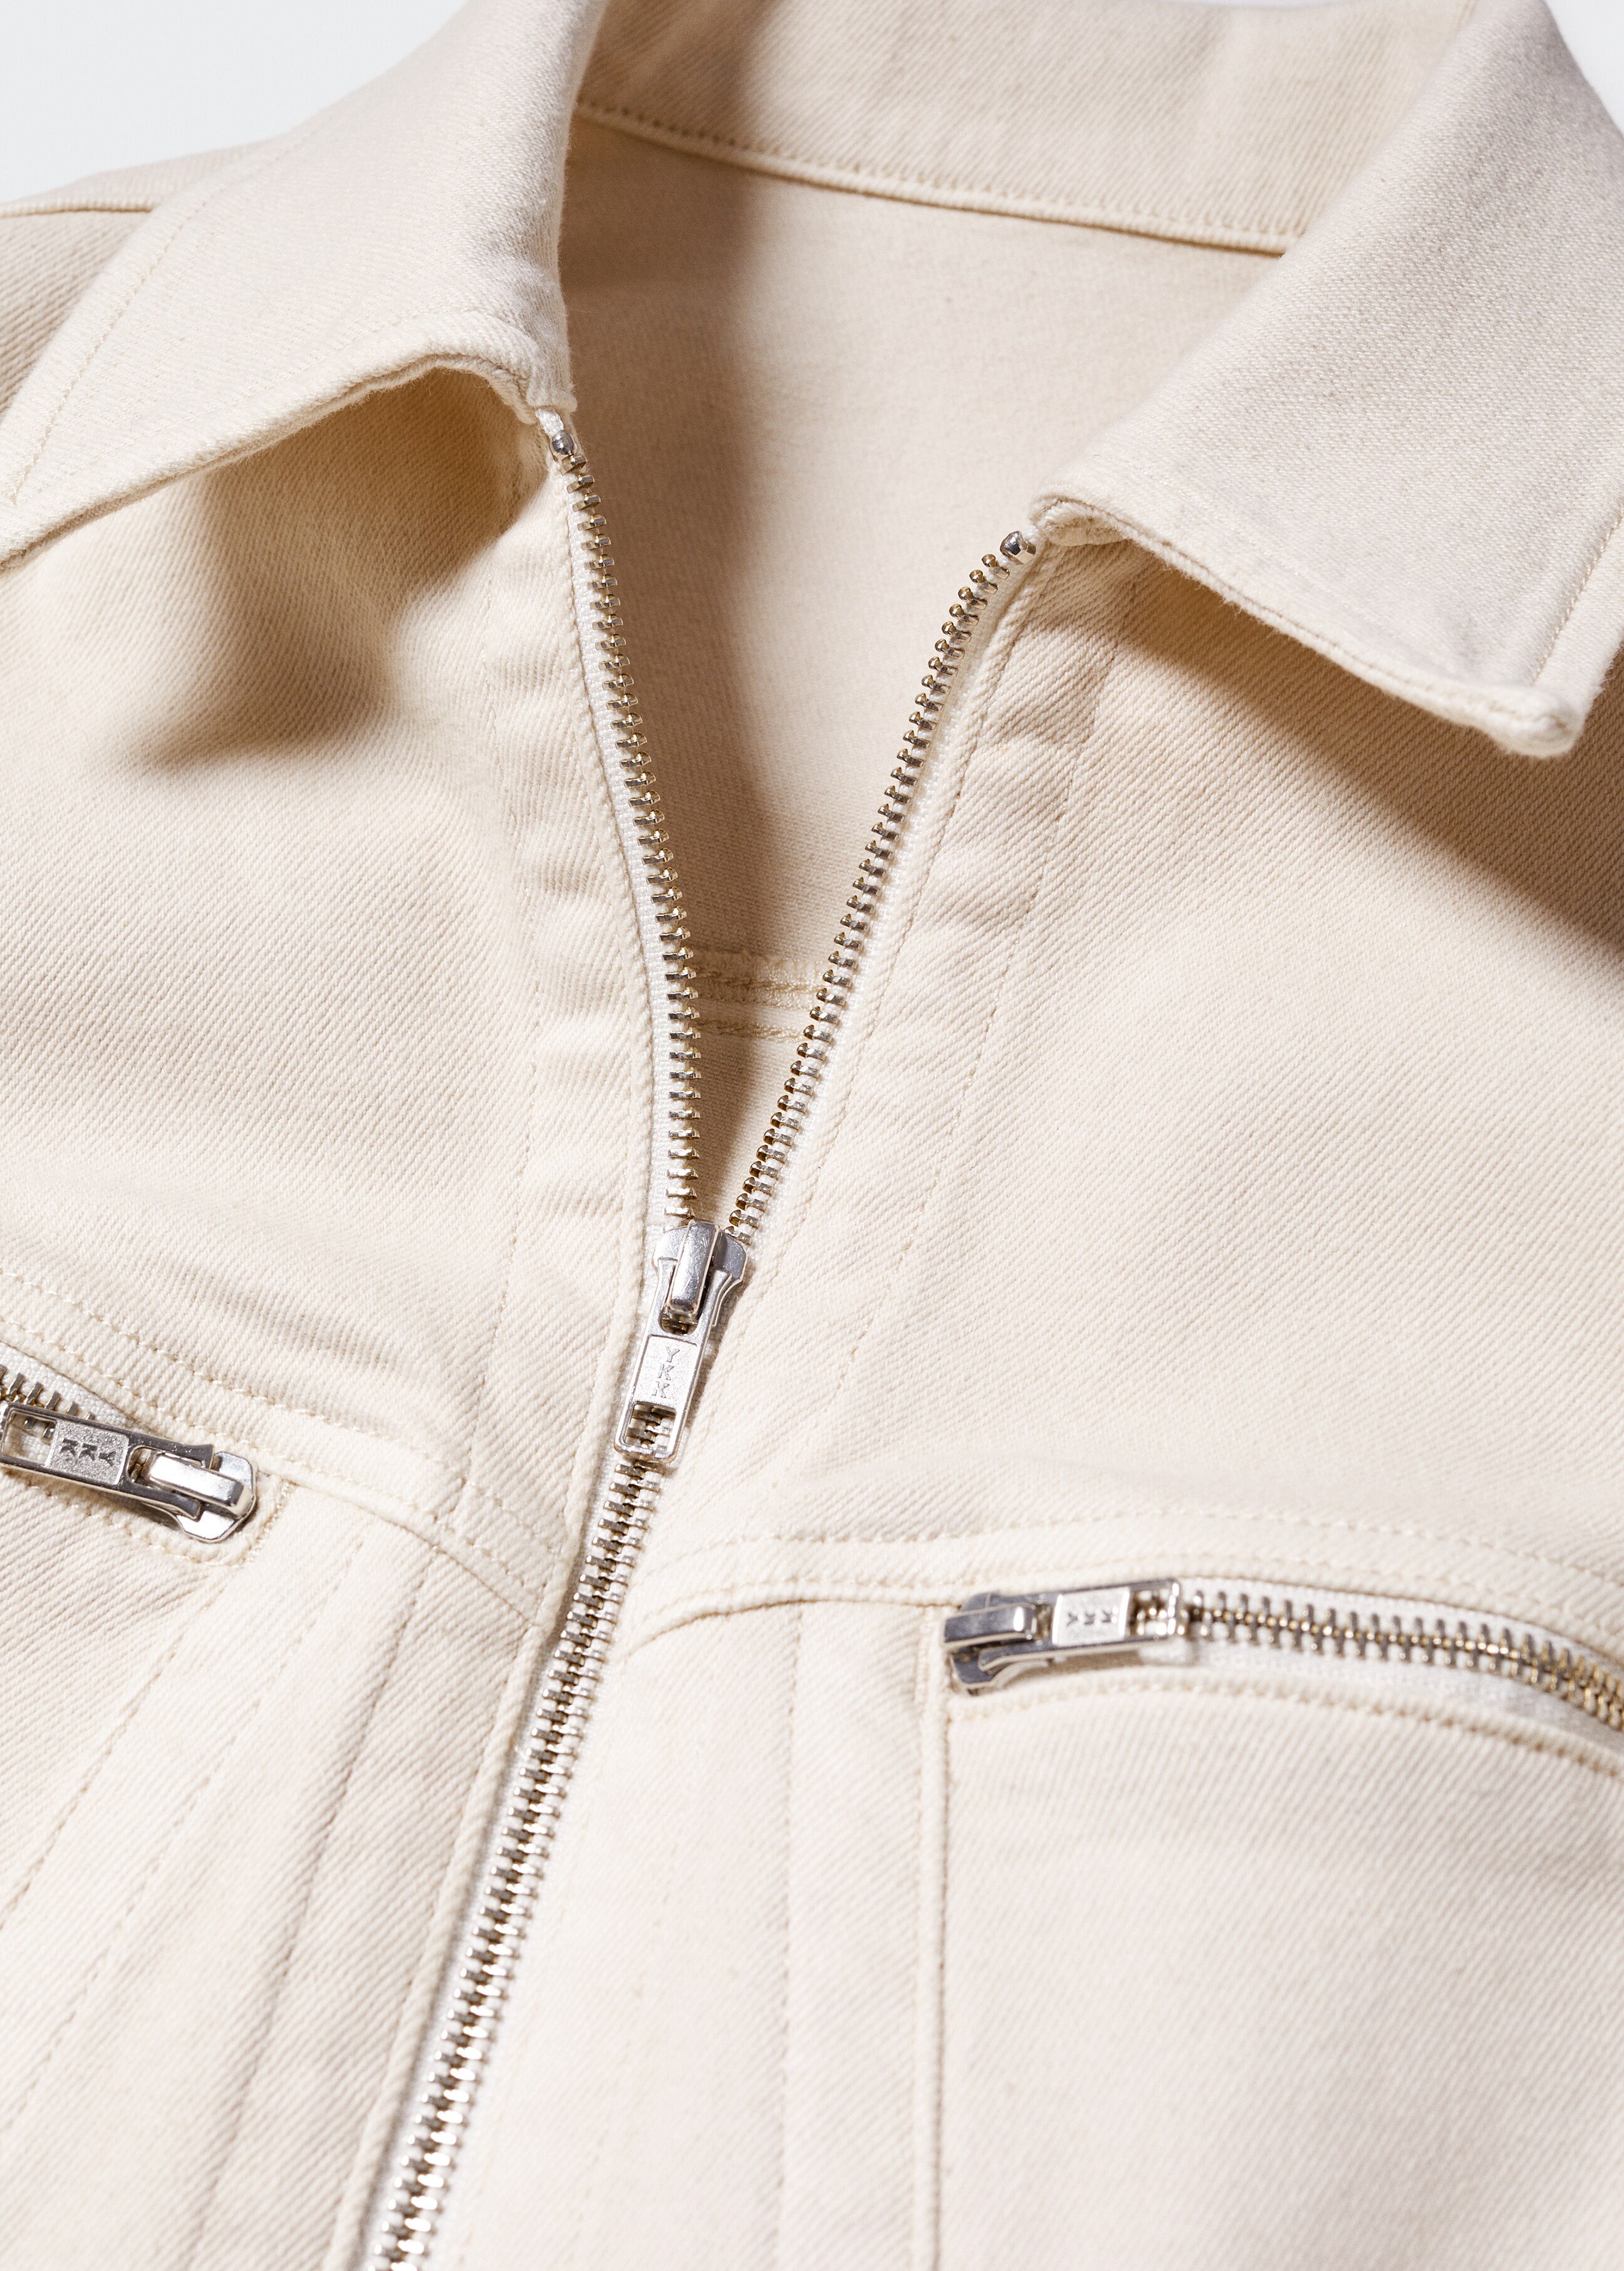 Rounded hem jacket - Details of the article 8